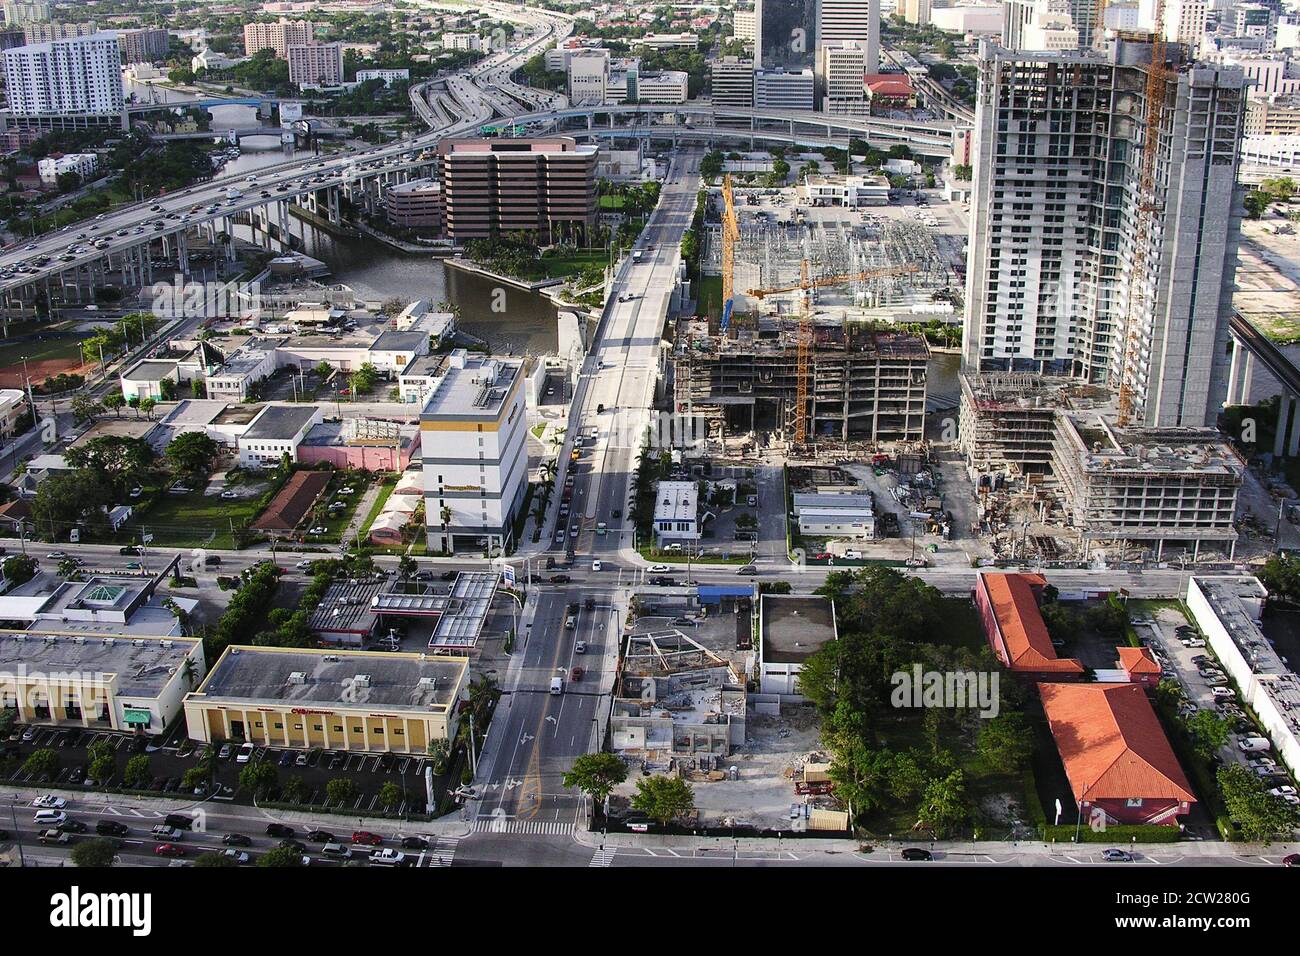 Miami, Florida, USA - September 2005:  Archival aerial view of the downtown building construction along SW 2nd Ave near the Miami River. Stock Photo